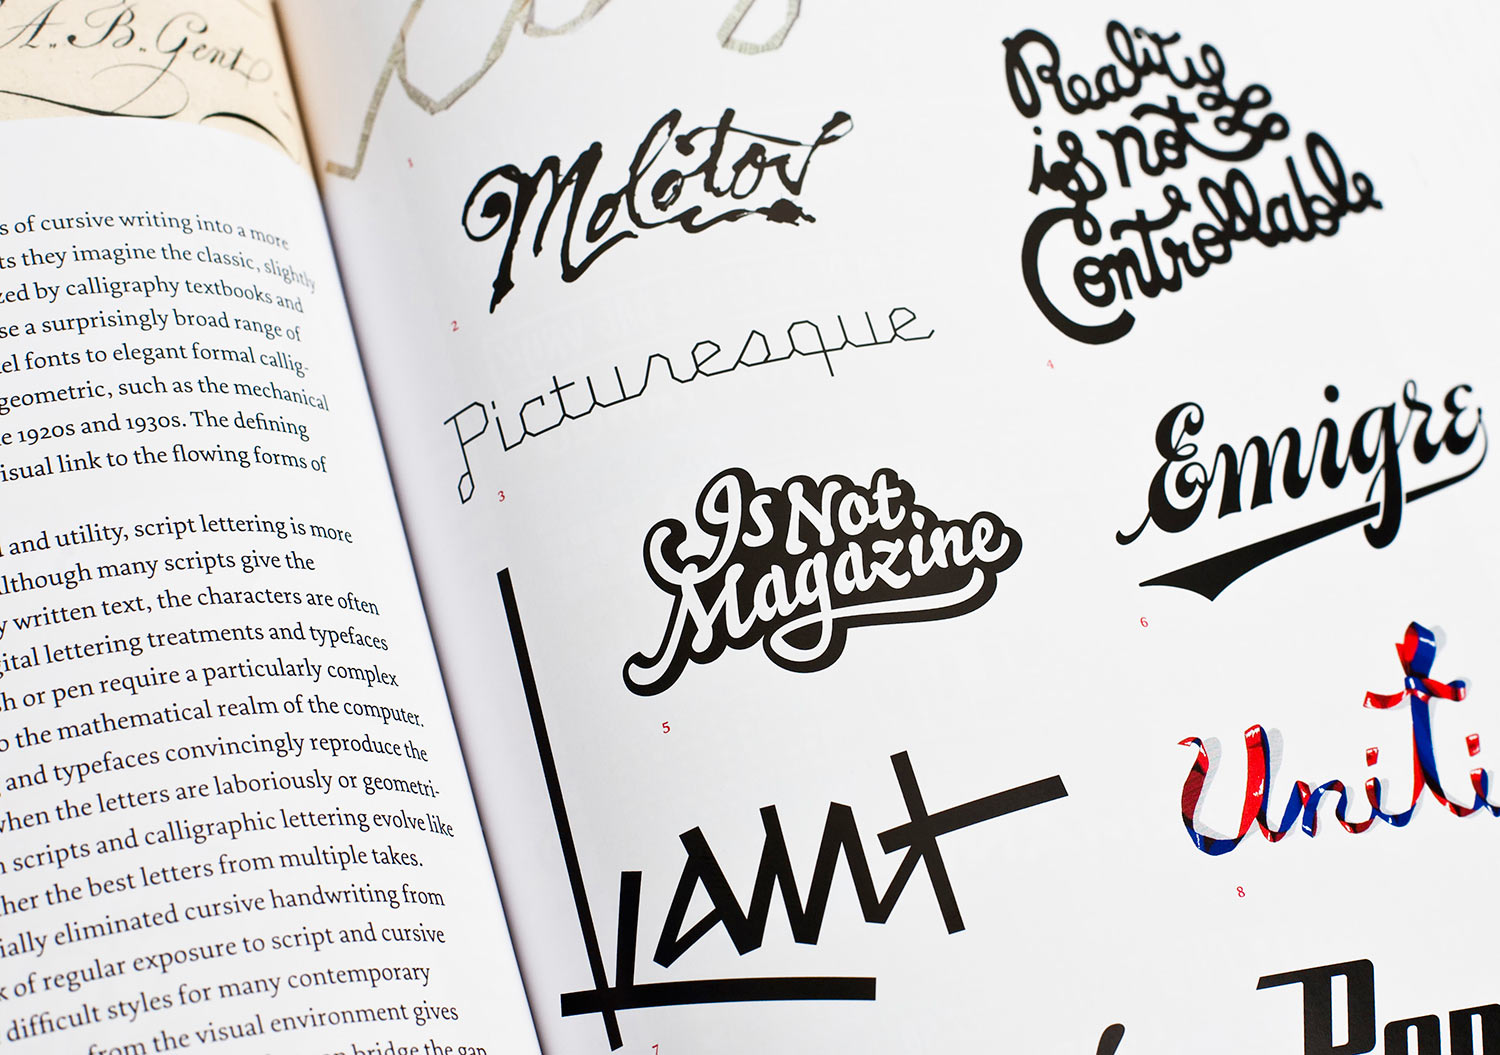 Script lettering and logos from the book Lettering & Type